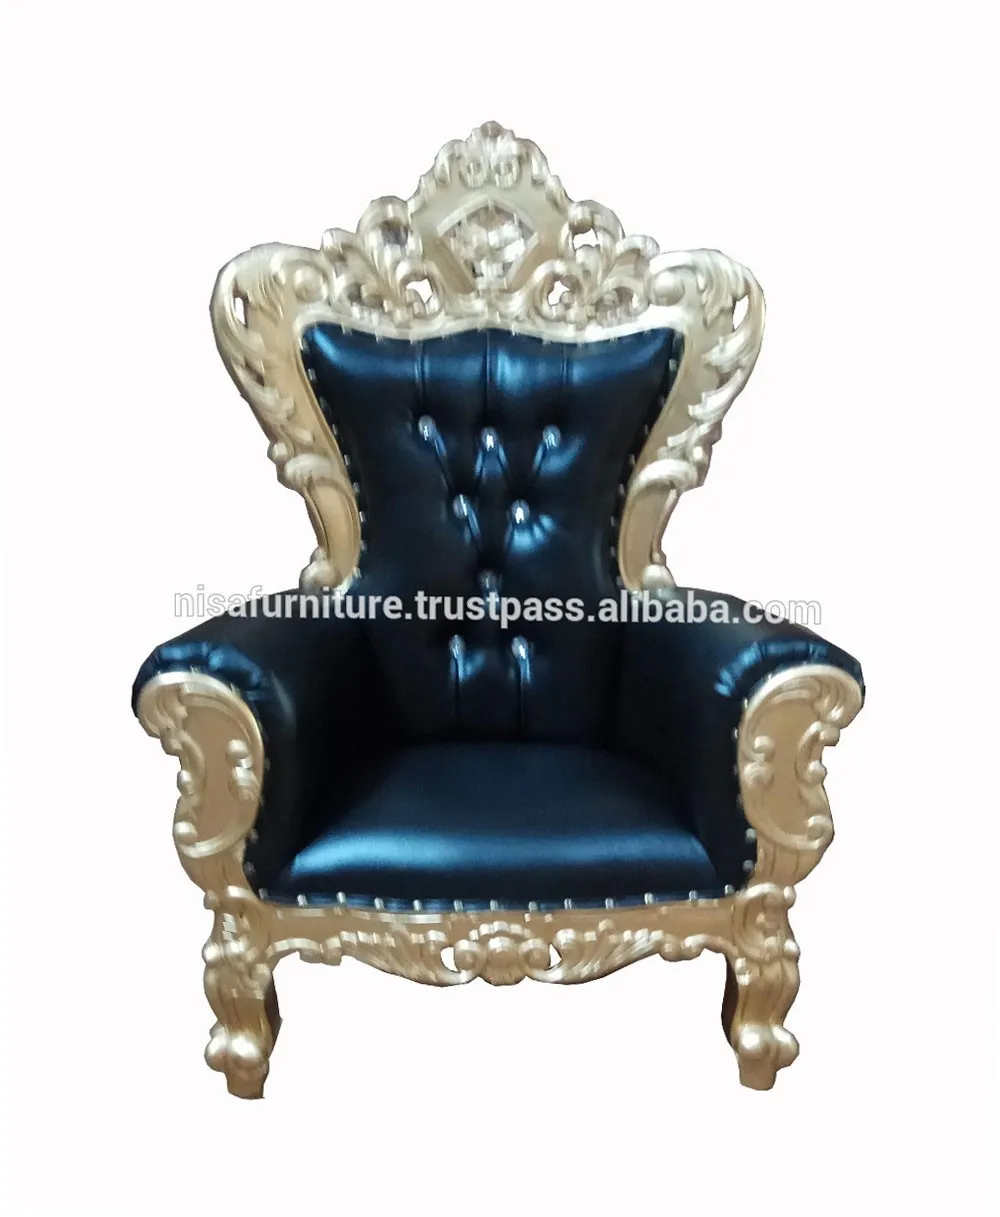 baby throne chair